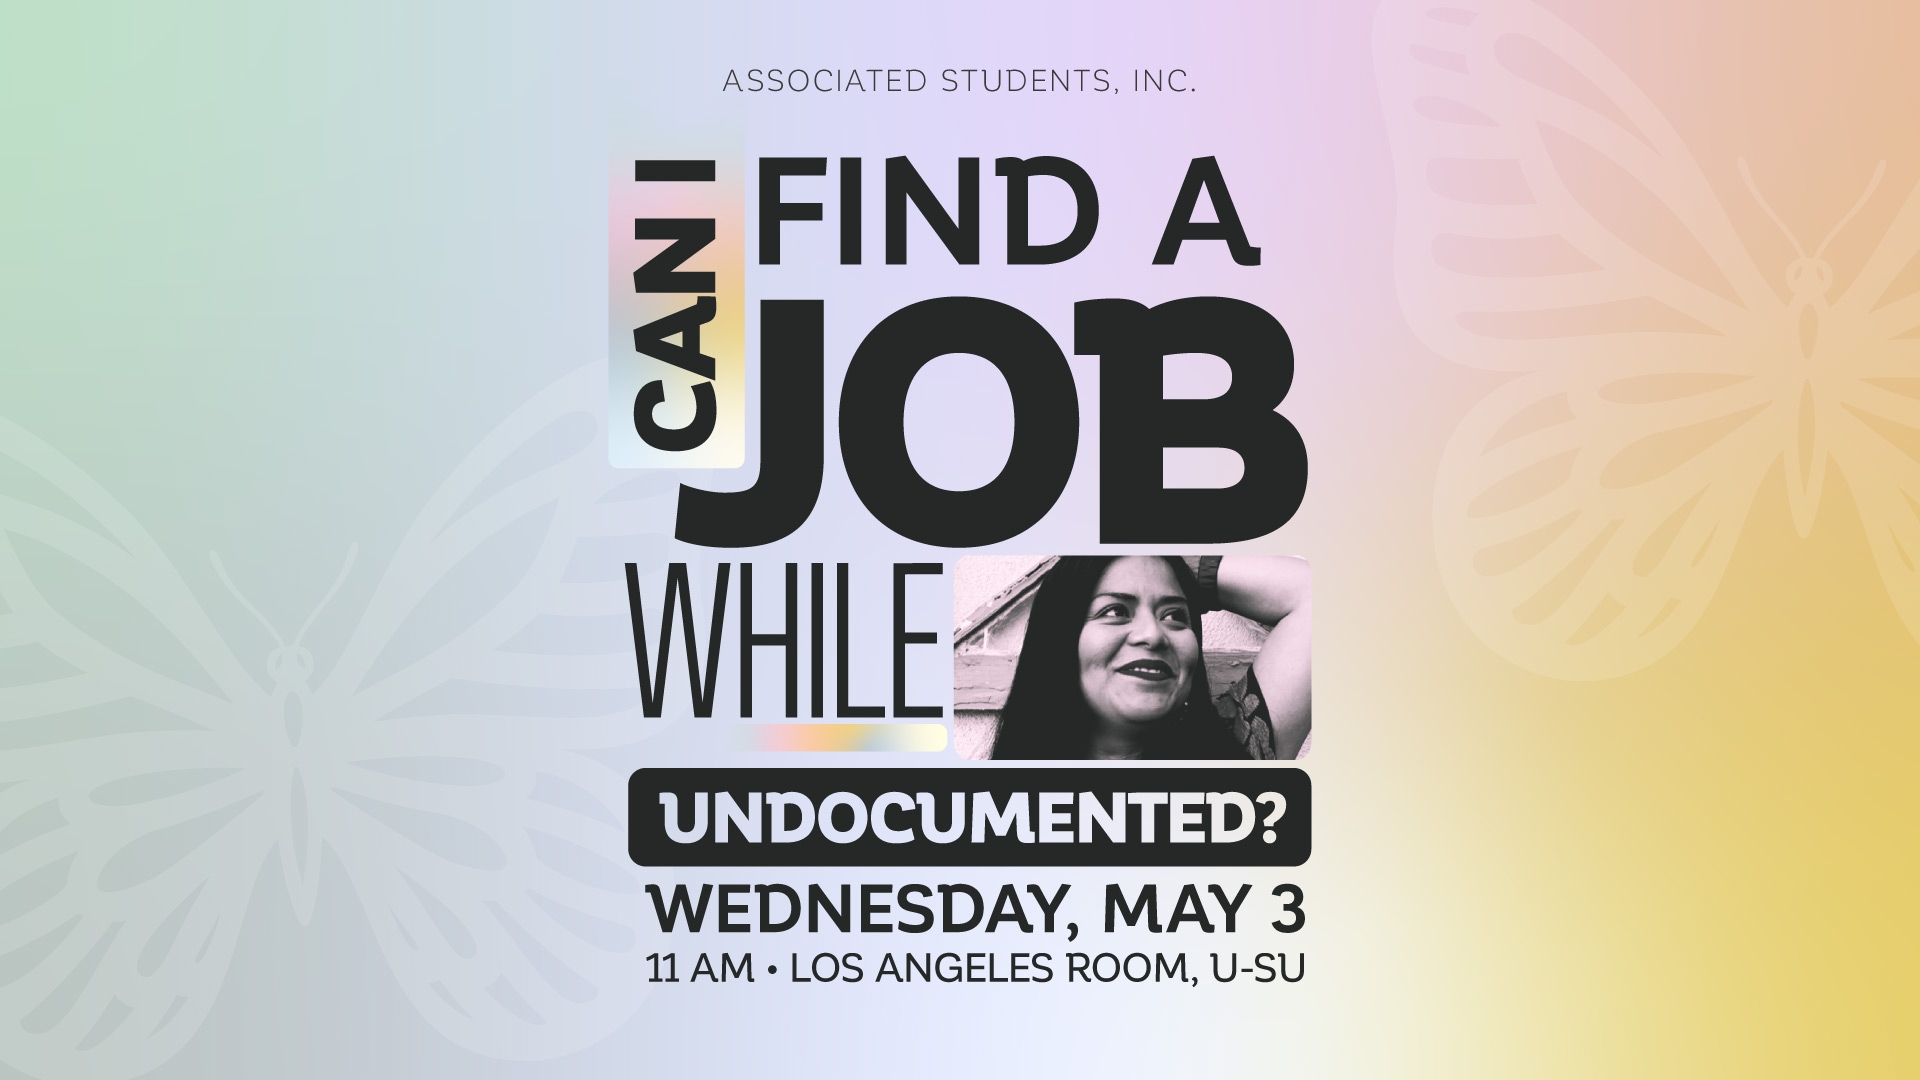 Can I Find a Job While Undocumented?